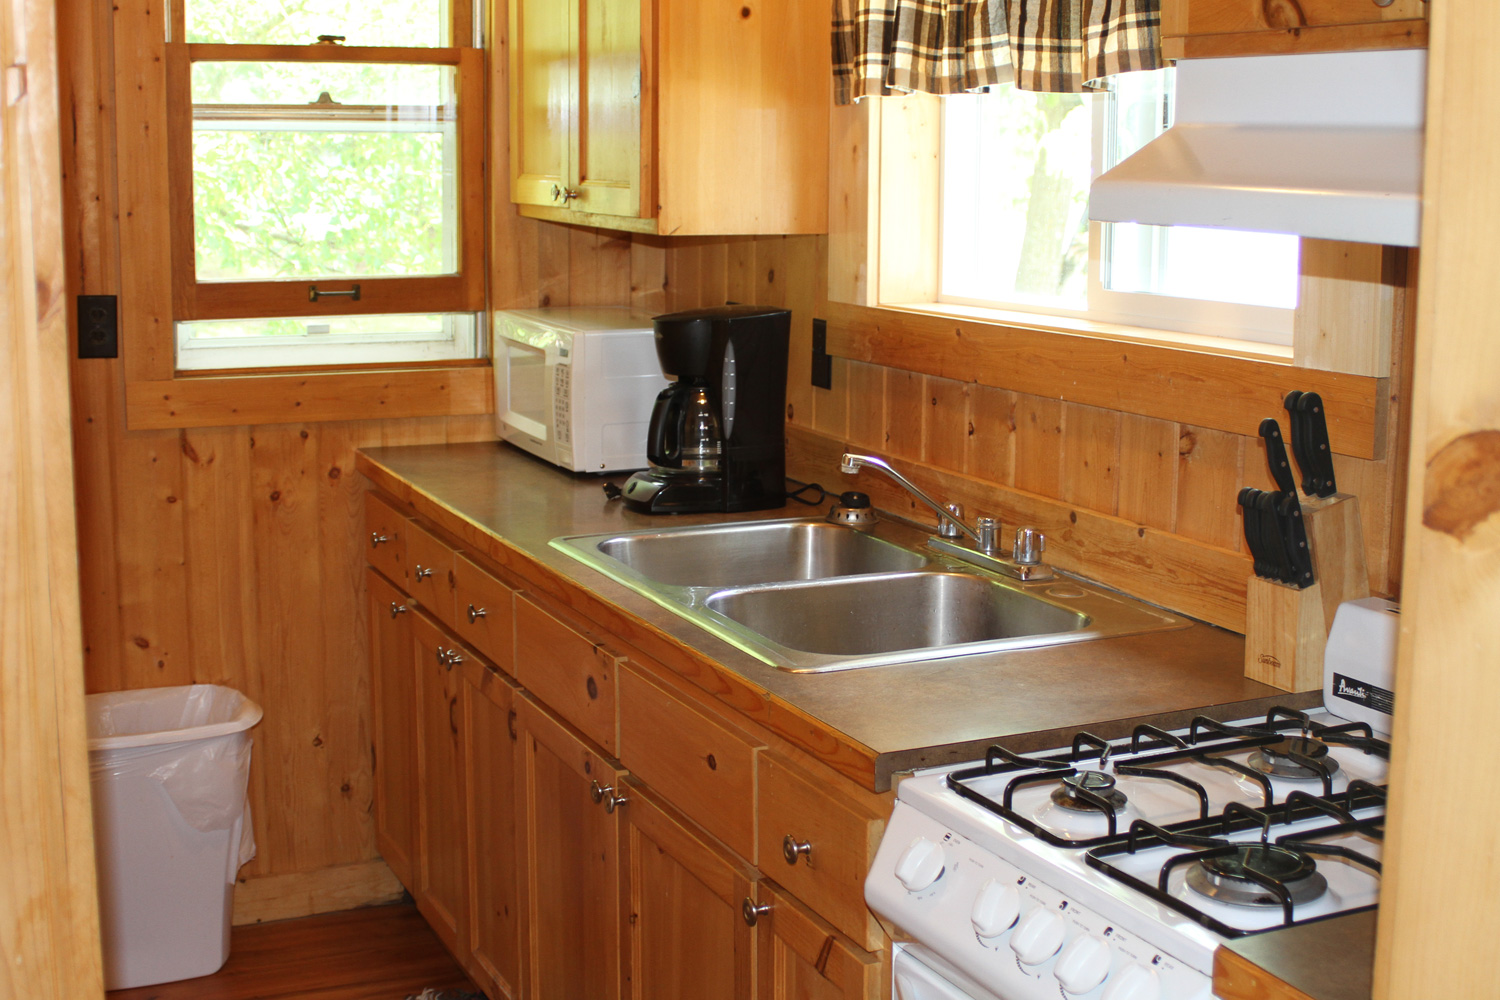 Galley Style Kitchen with lake breezes